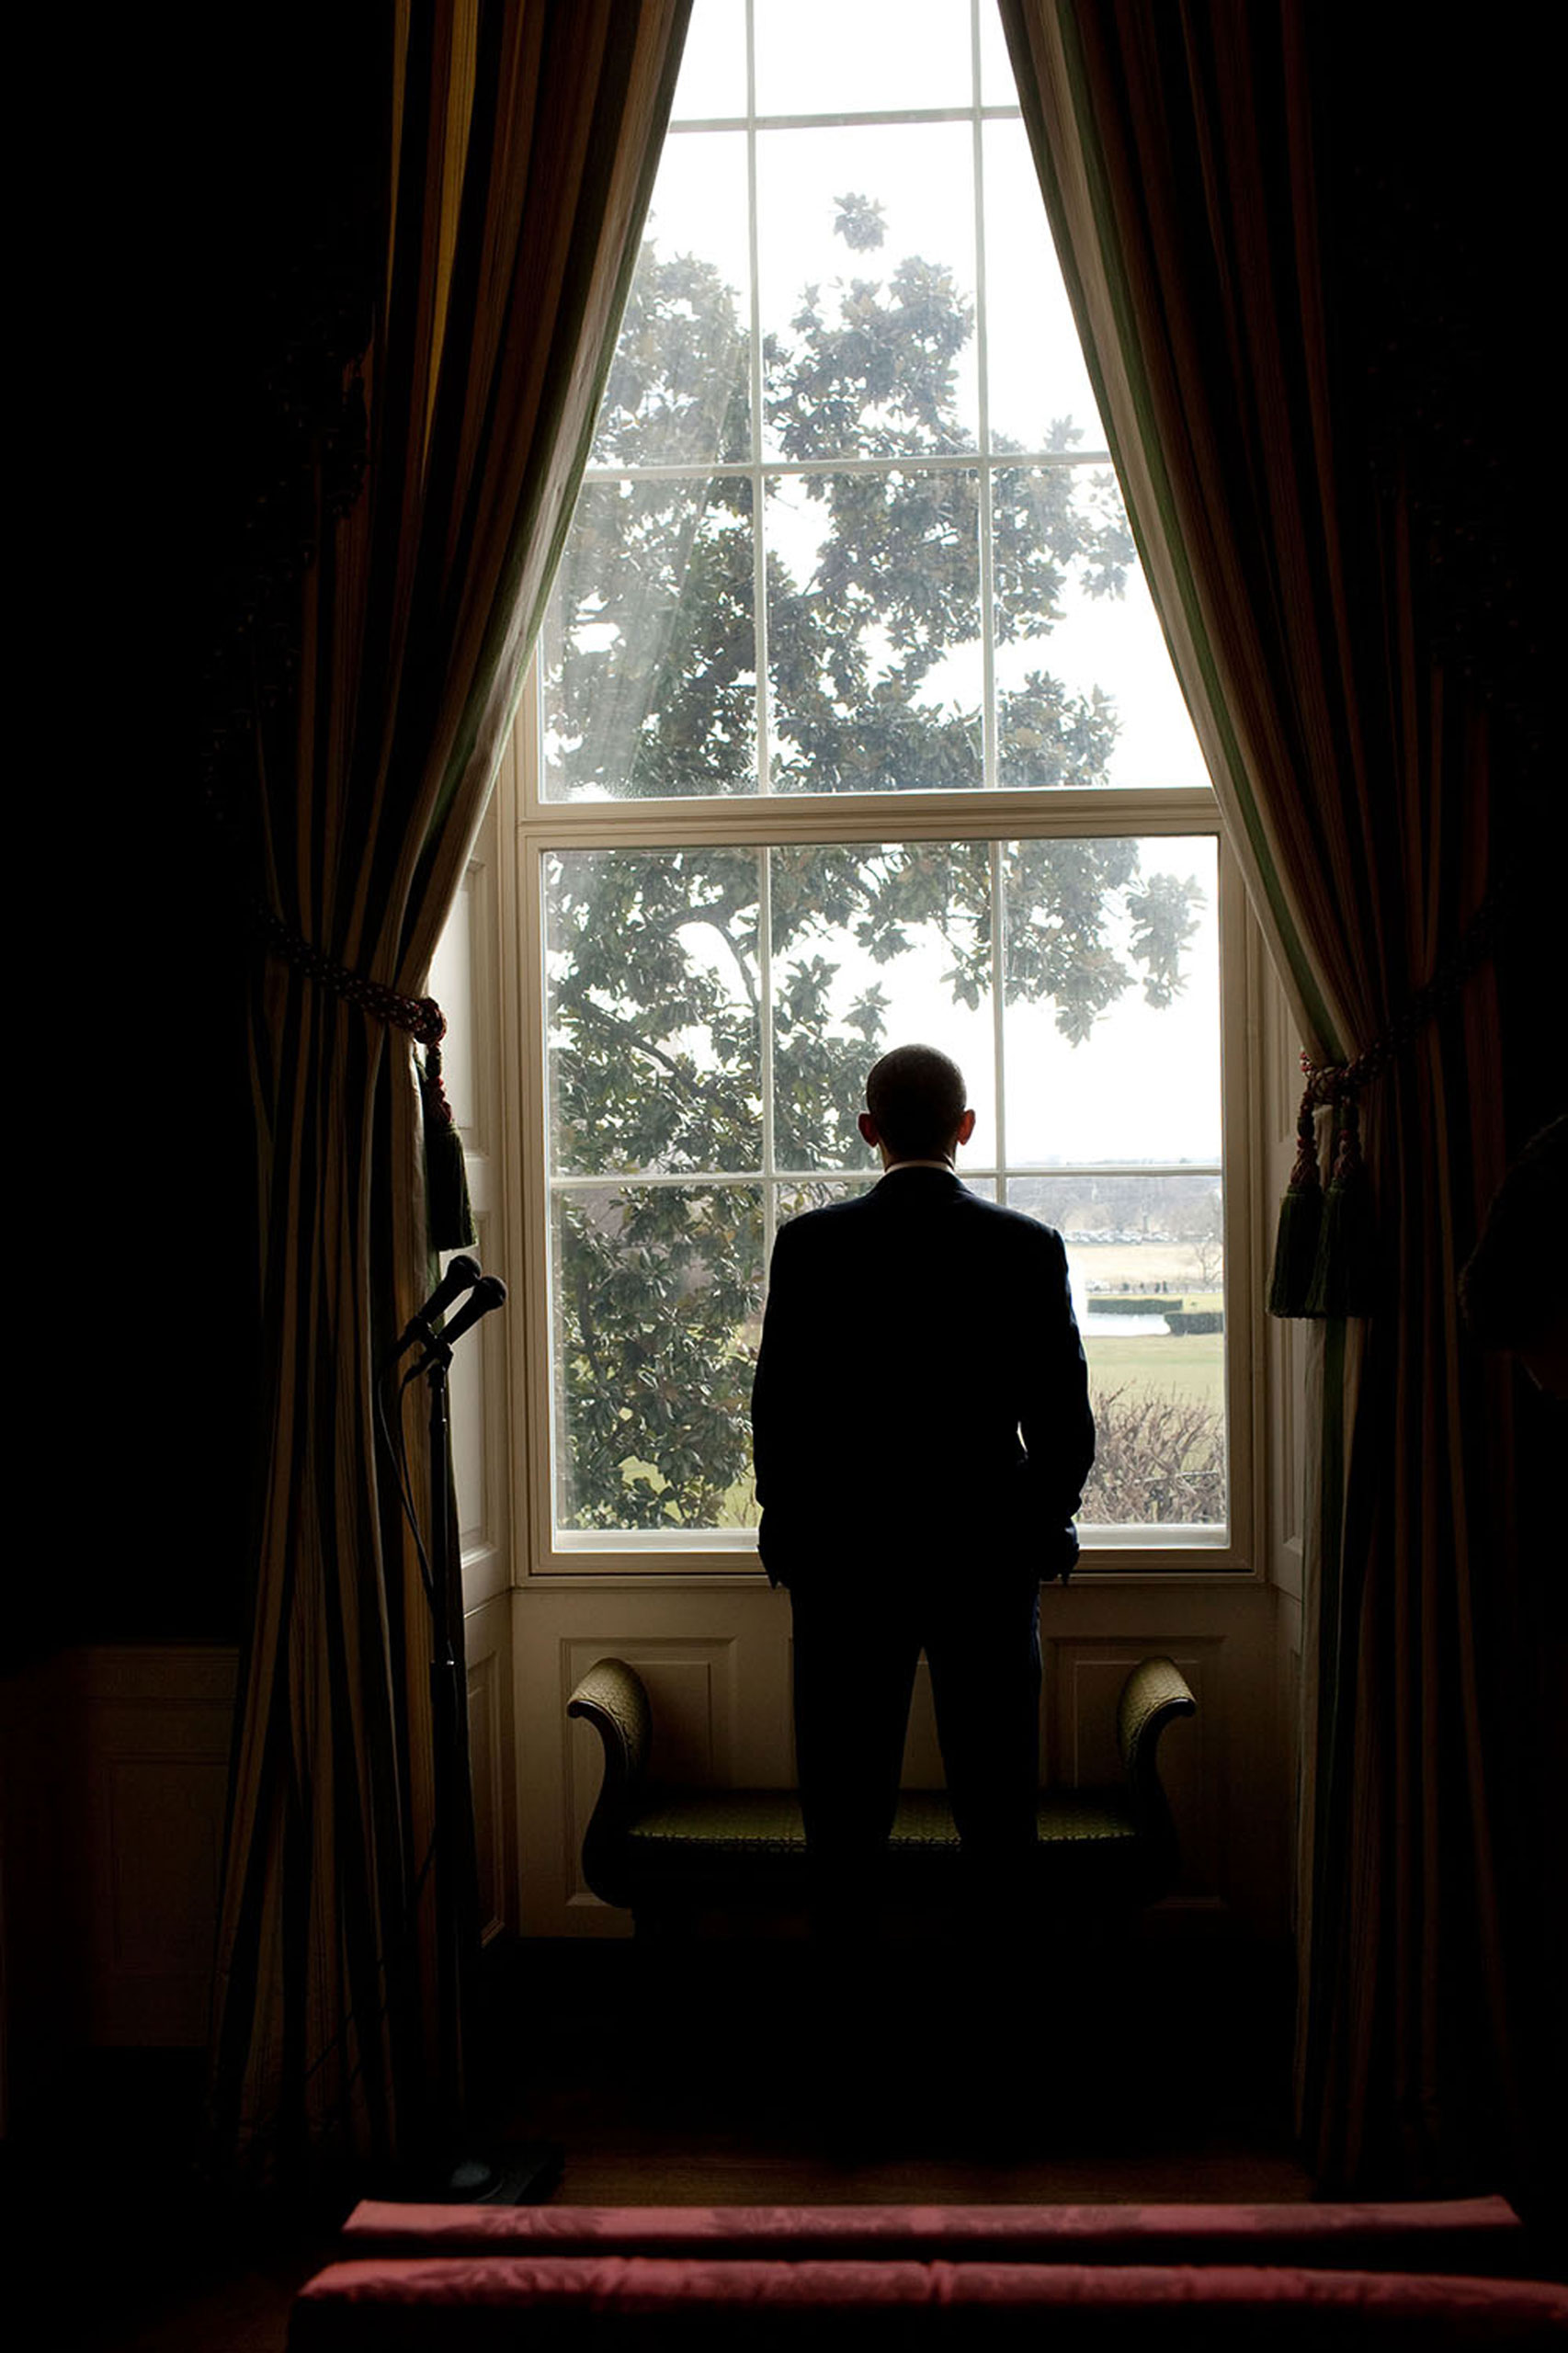 “While waiting to be introduced for an event in the East Room of the White House, the President looks out a window in the Green Room towards a view of the Washington Monument and Jefferson Memorial,”Jan. 6, 2010.